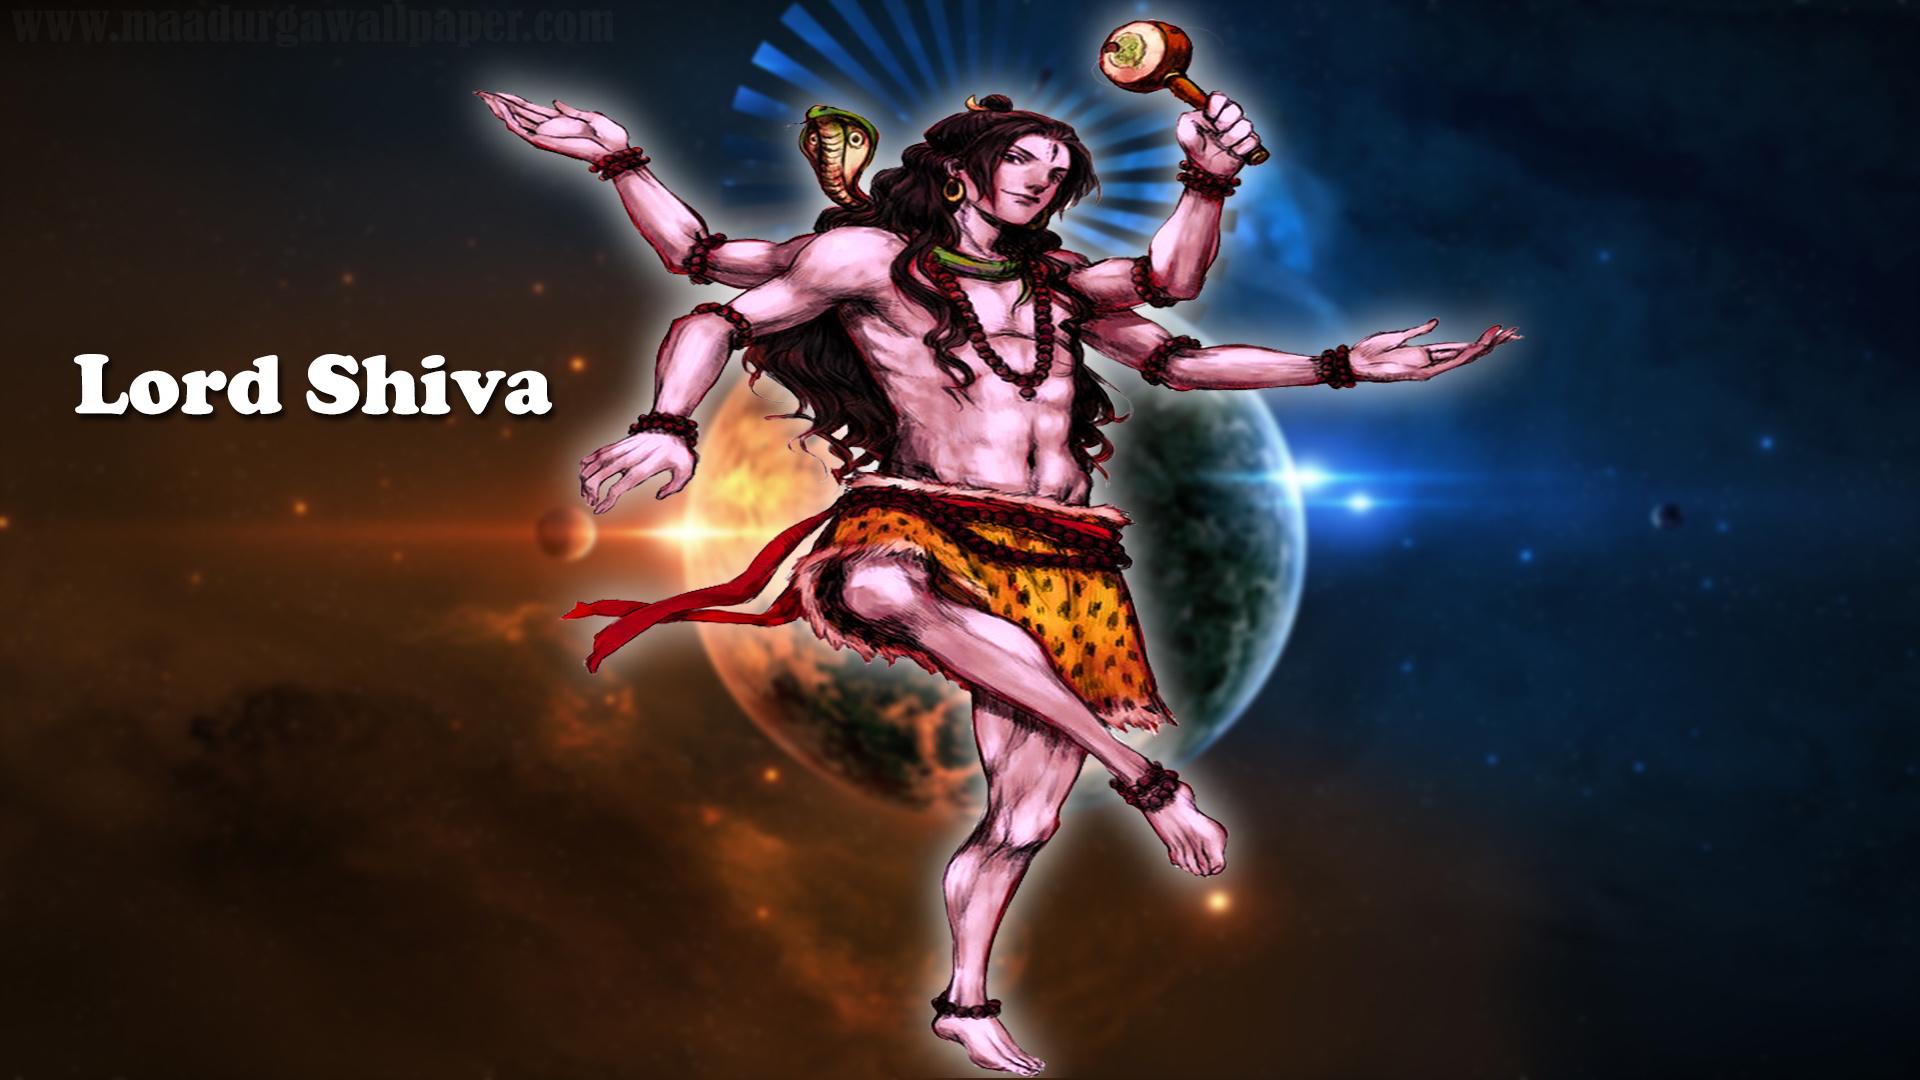 Picture Of Lord Shiva Dancing Wallpaper HD #rock Cafe